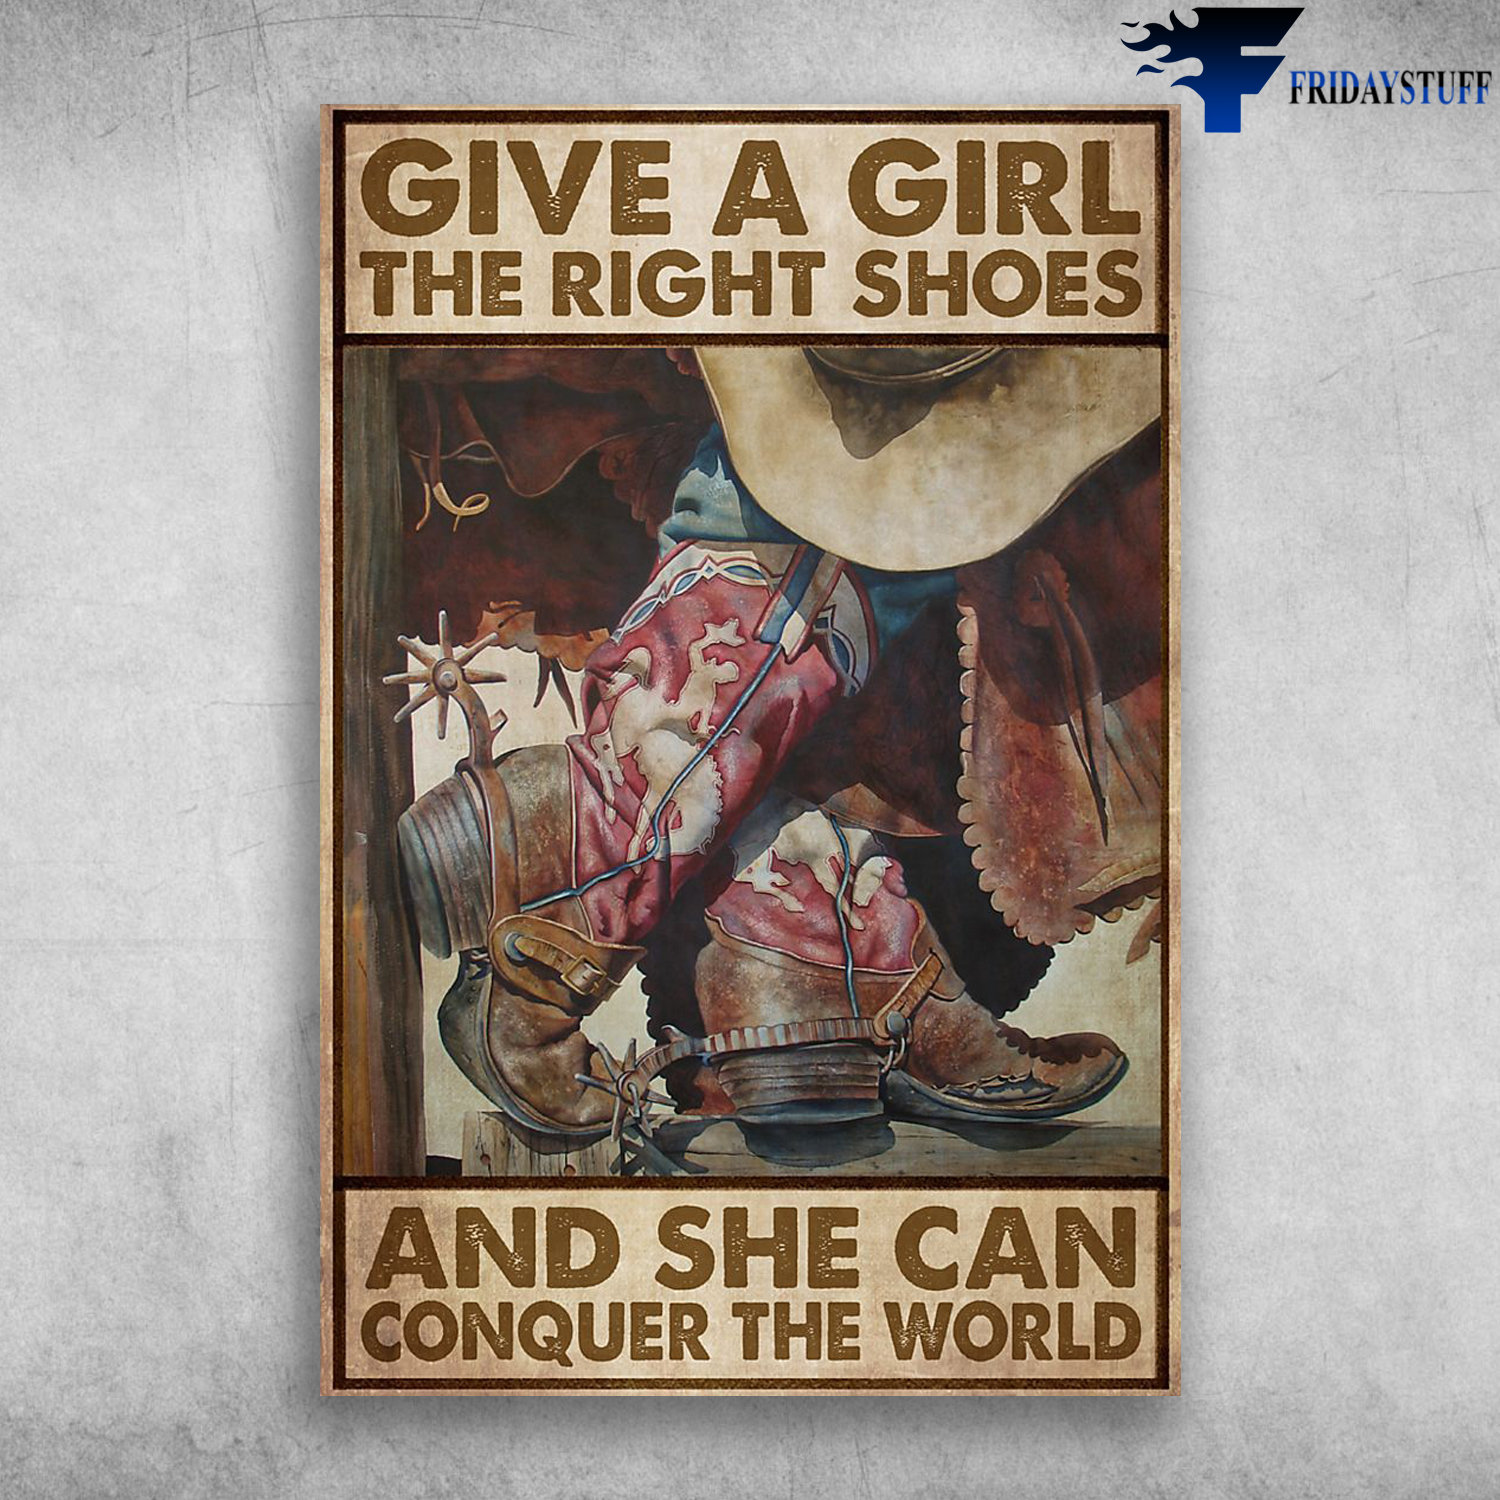 Give A Girl The Night Shoes And She Can Conquer The World